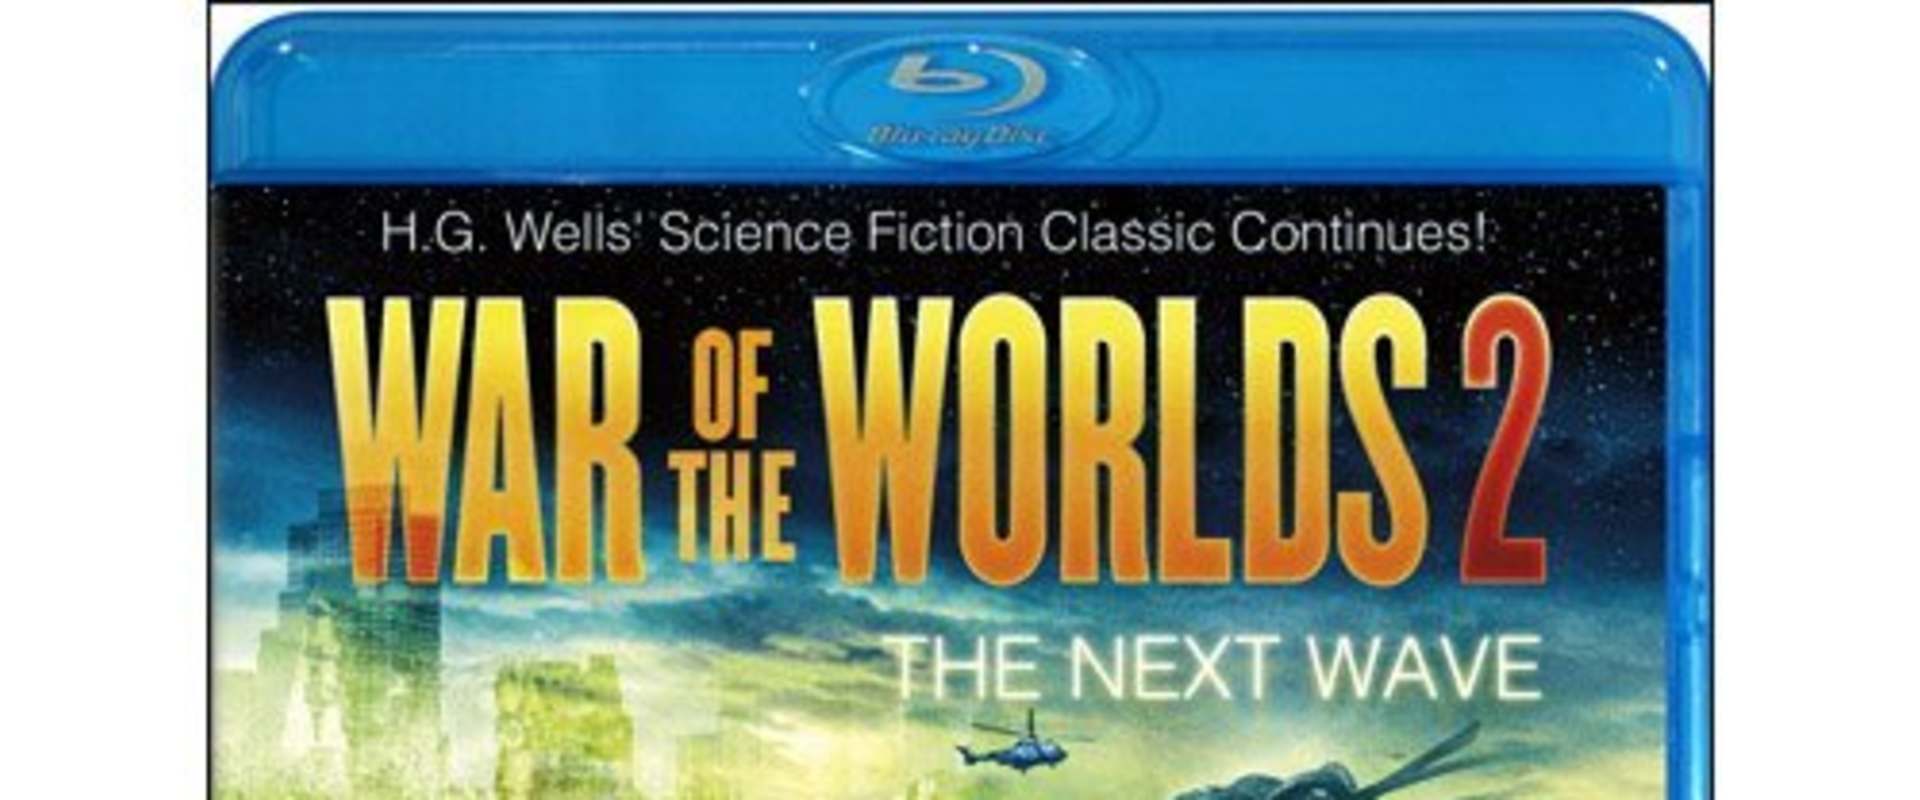 War of the Worlds 2: The Next Wave background 2